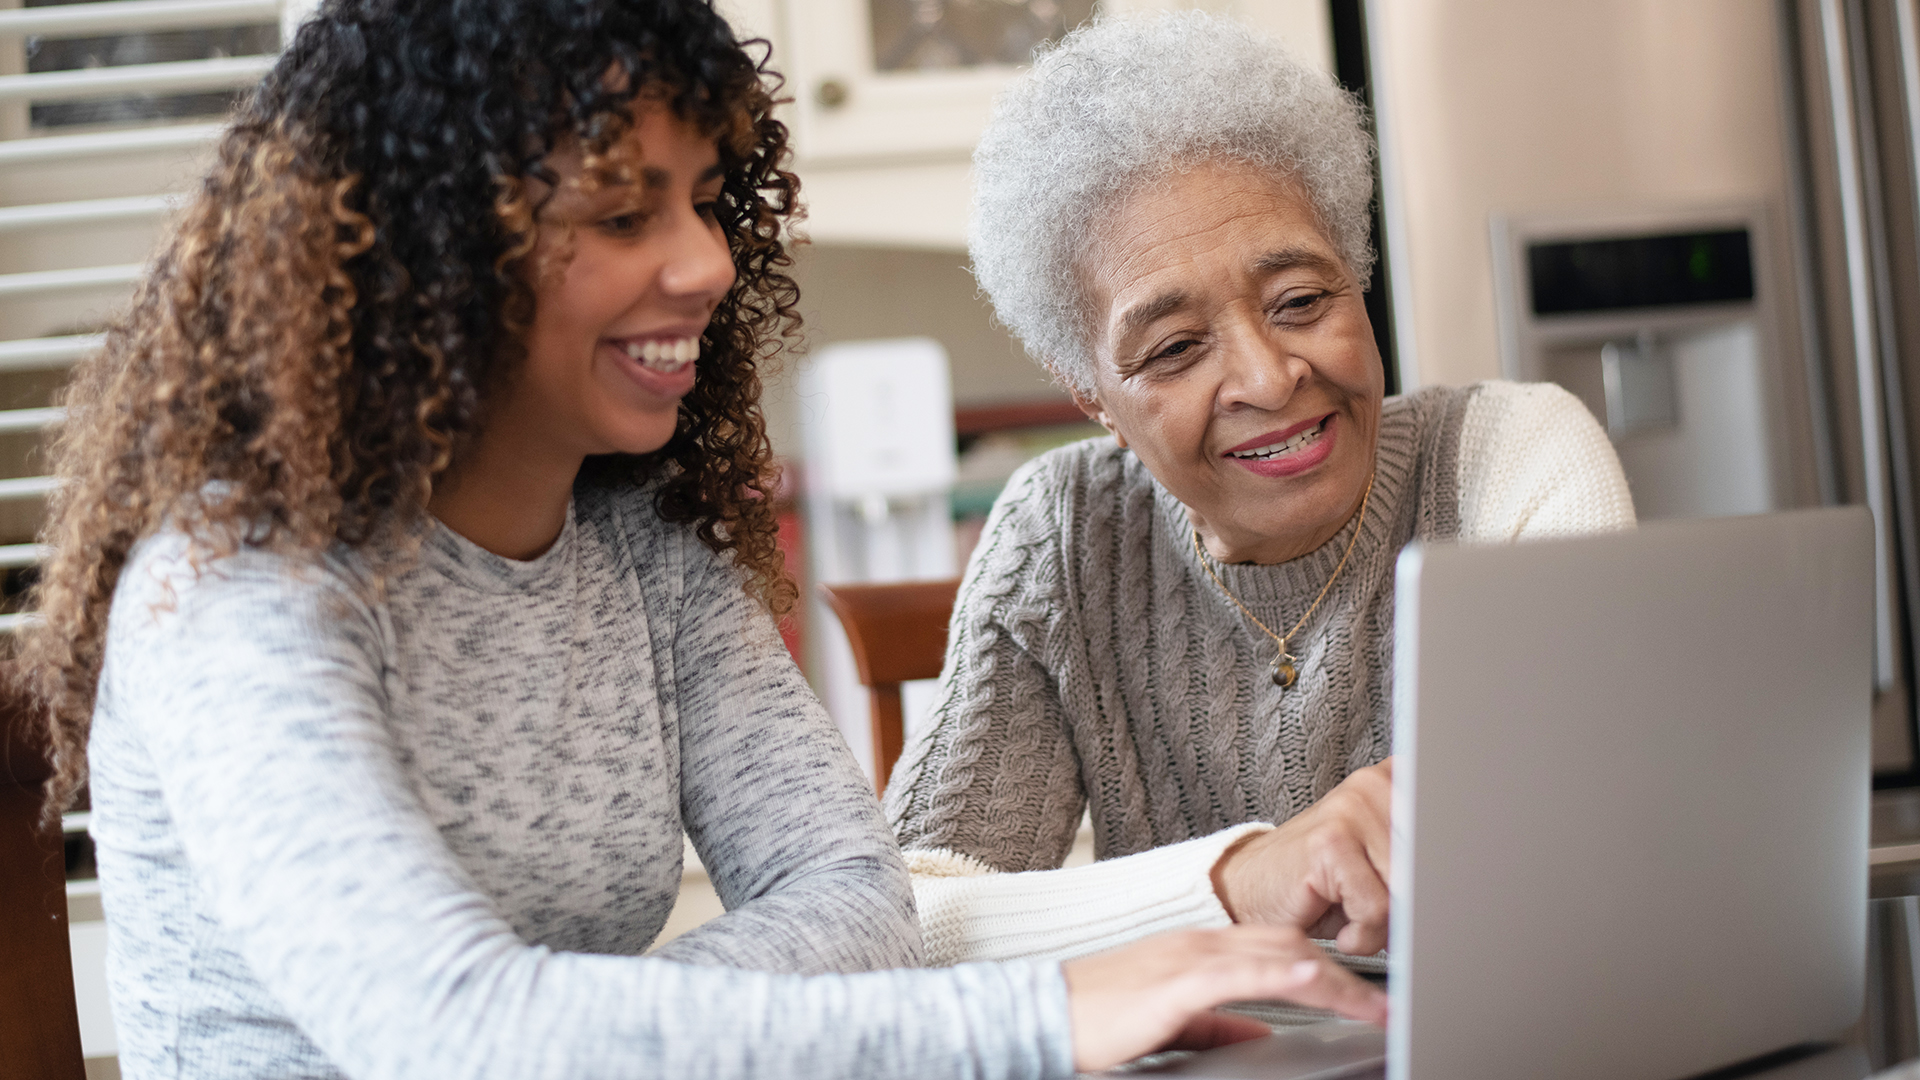 A young mature woman of African decent, shows her elderly mother how to video chat with family on a laptop.  They are both seated at the kitchen table, dressed casually and smiling as they enjoy the conversation with family far away.